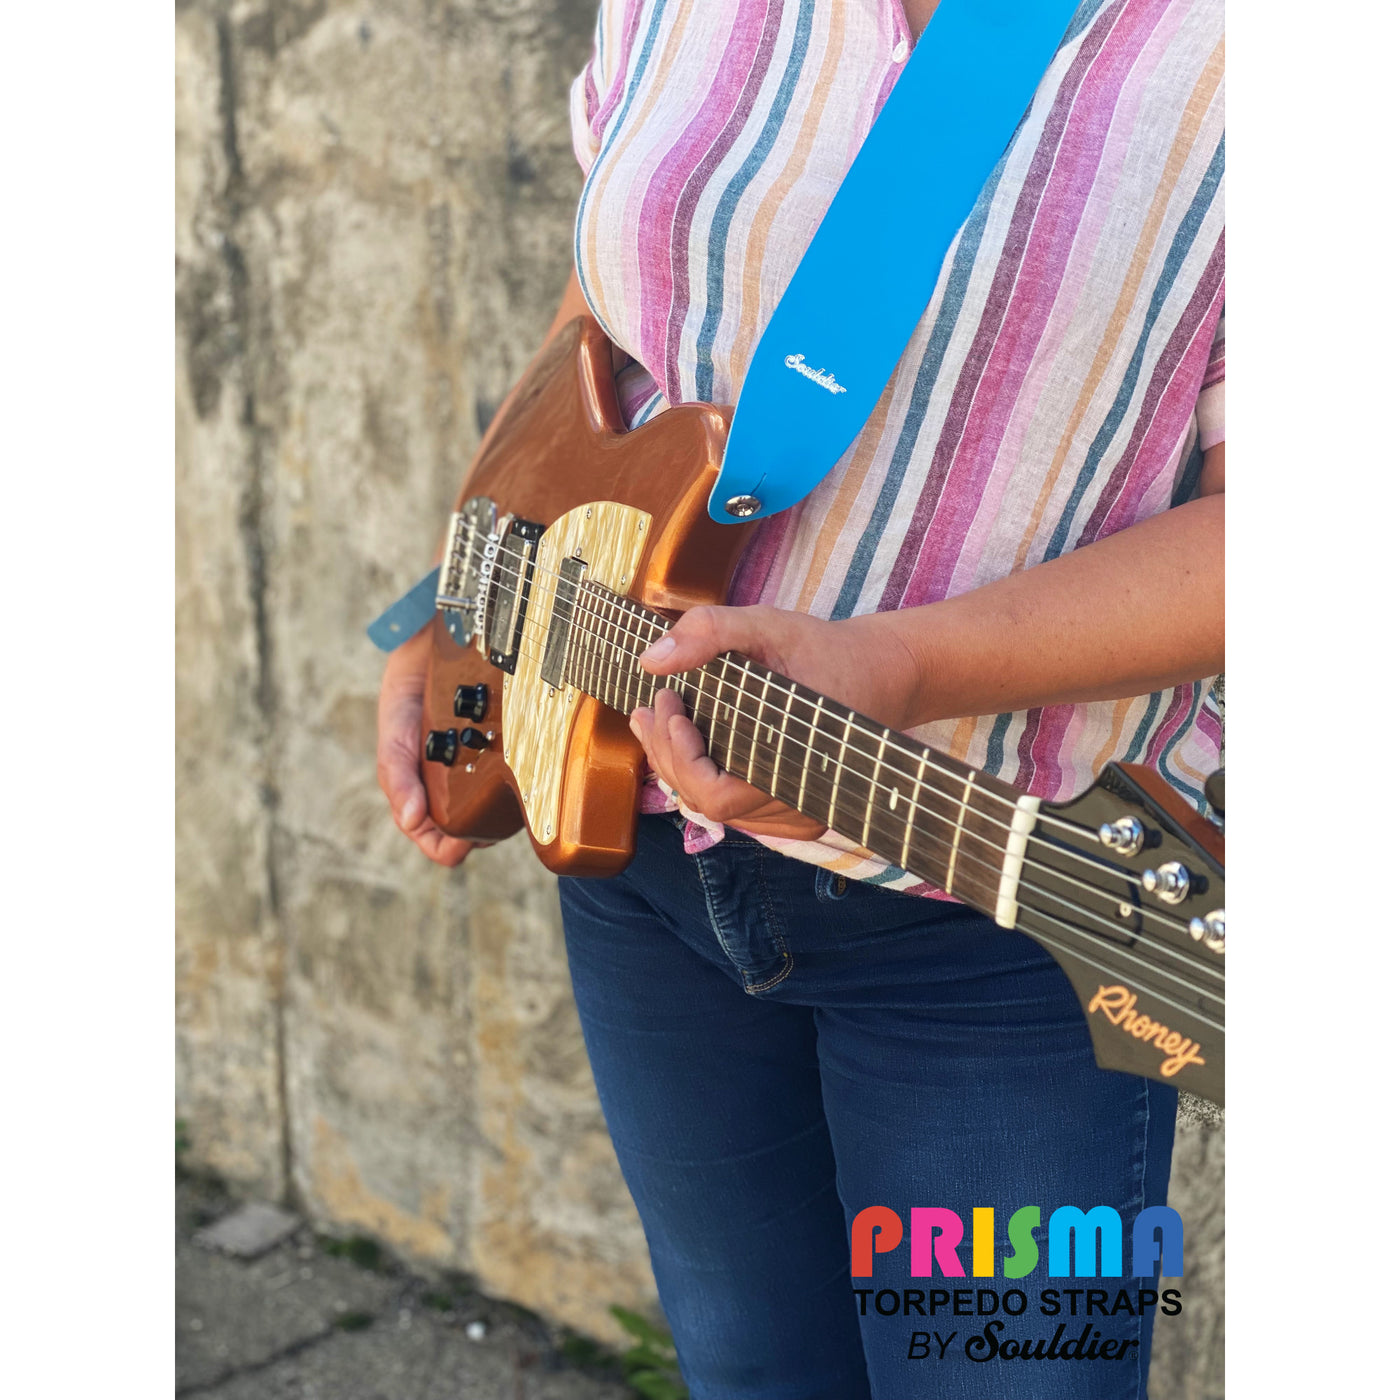 Souldier PSMGSTQ - Handmade Prisma Guitar Strap for Bass, Electric or Acoustic Guitar, 2.5 Inches Wide and Adjustable Length from 43" to 57" Made in the USA, Turquoise